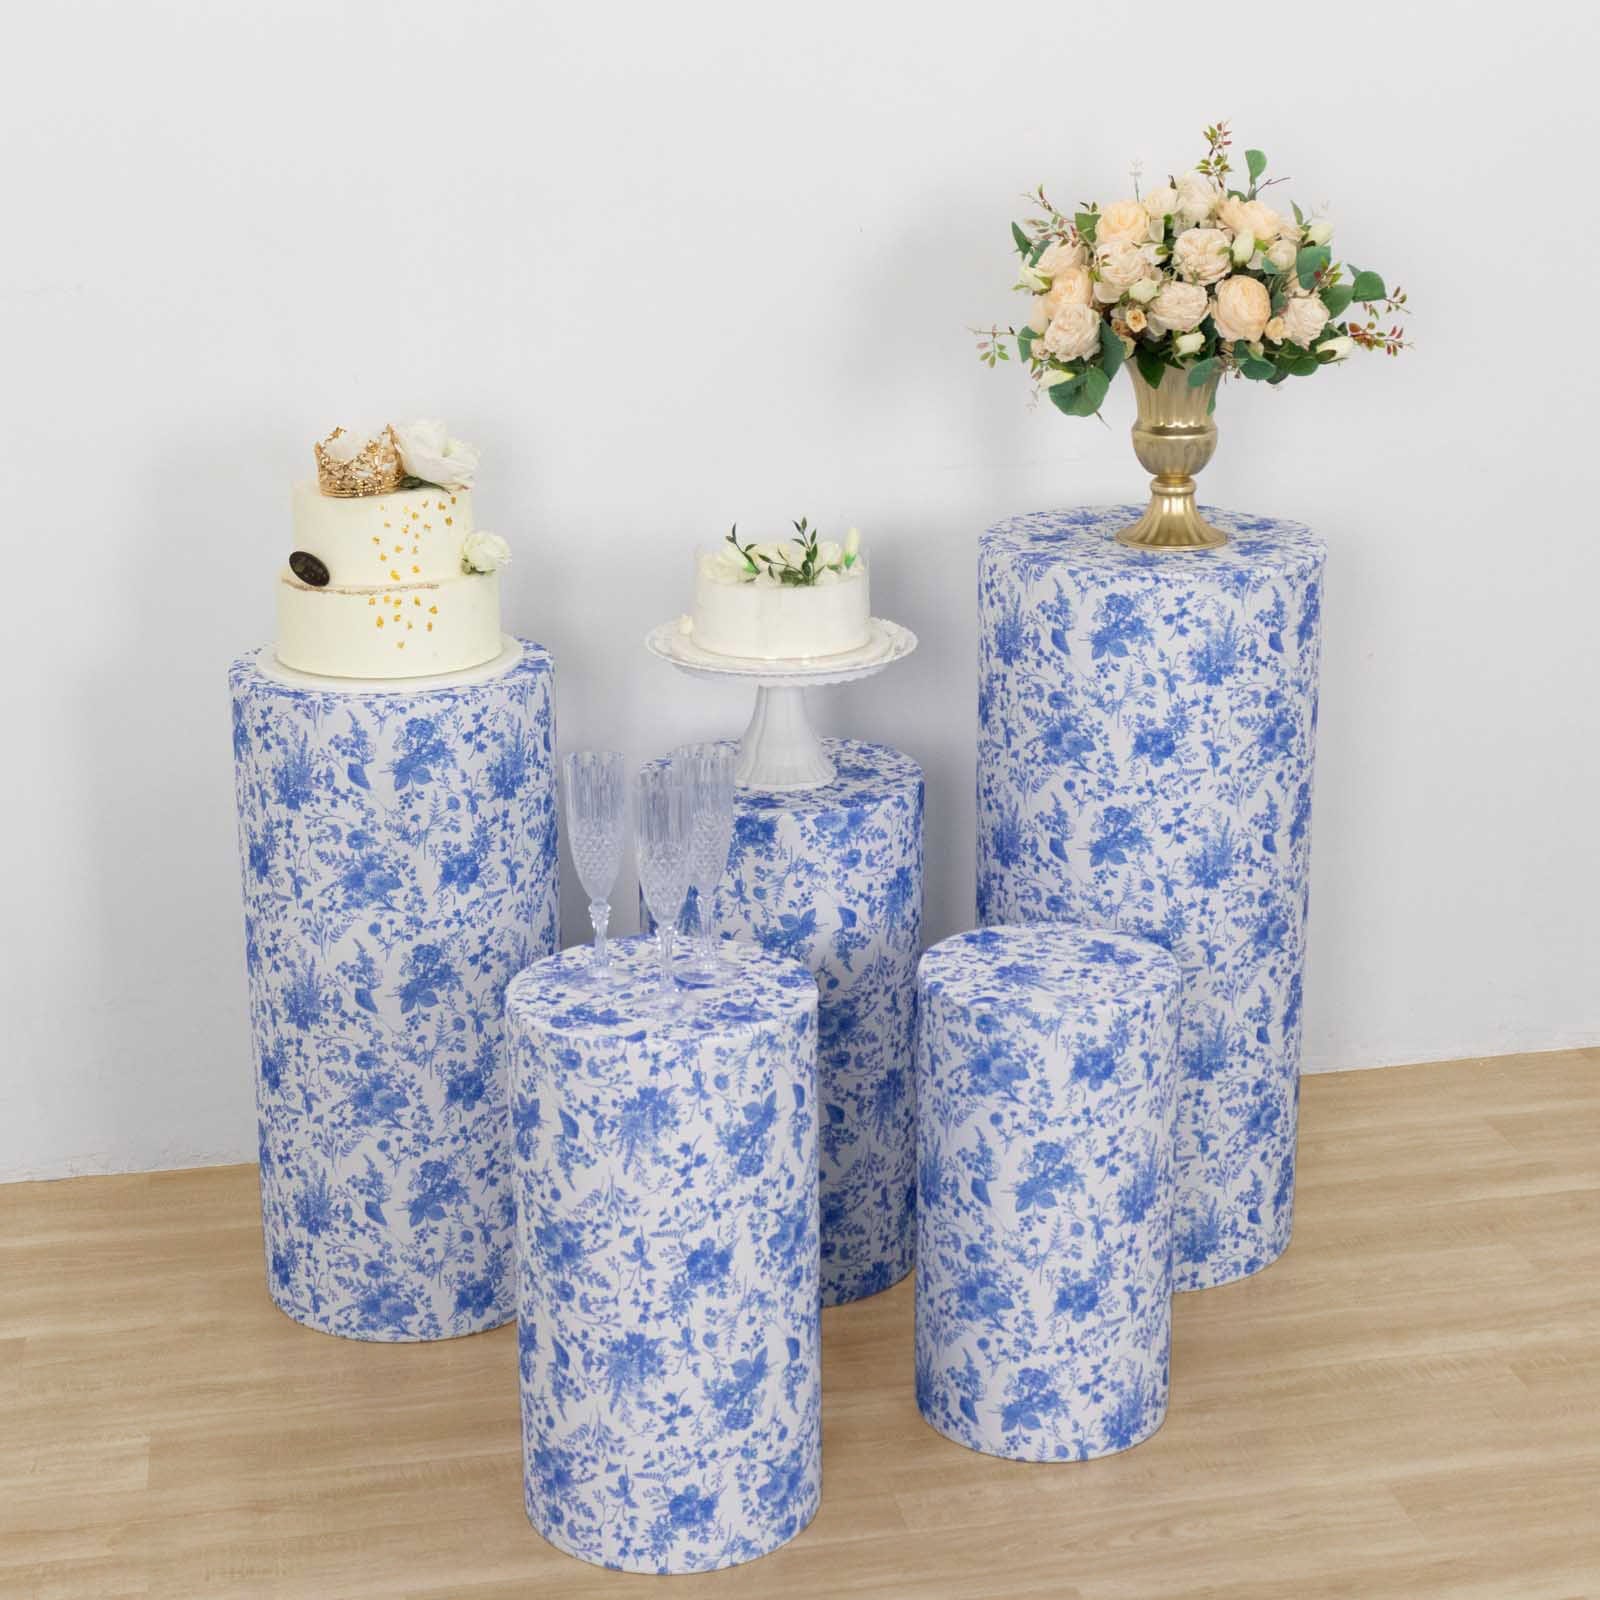 5 White Cylinder Pedestal Fitted Spandex Display Stand Covers Set with Blue Floral Print